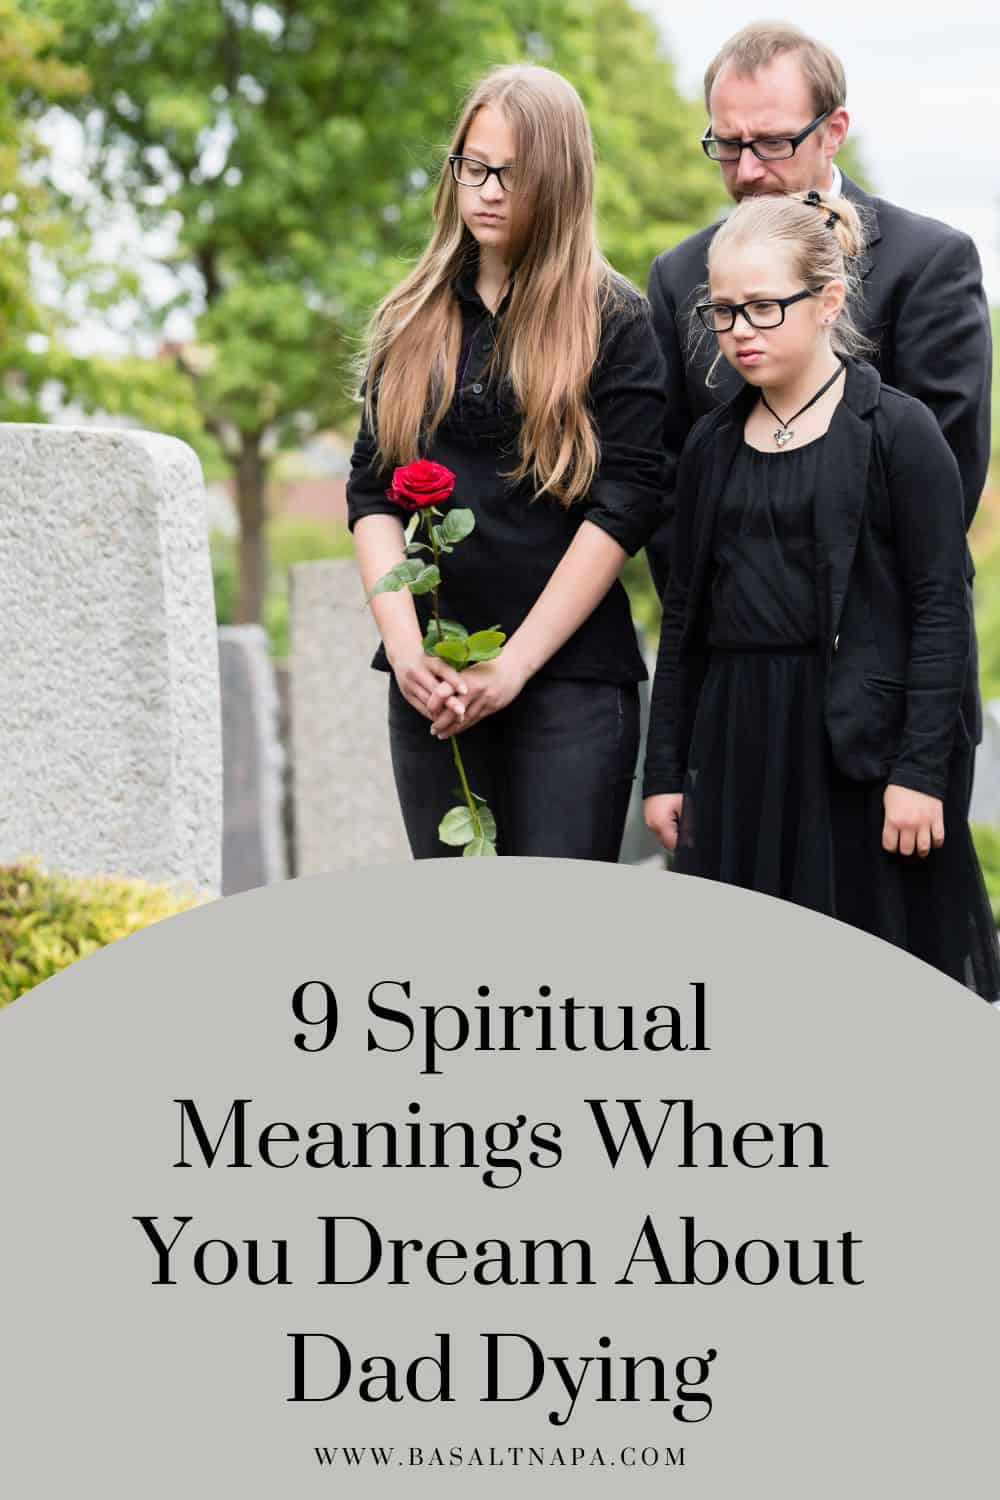 9 Spiritual Meanings When You Dream About Dad Dying